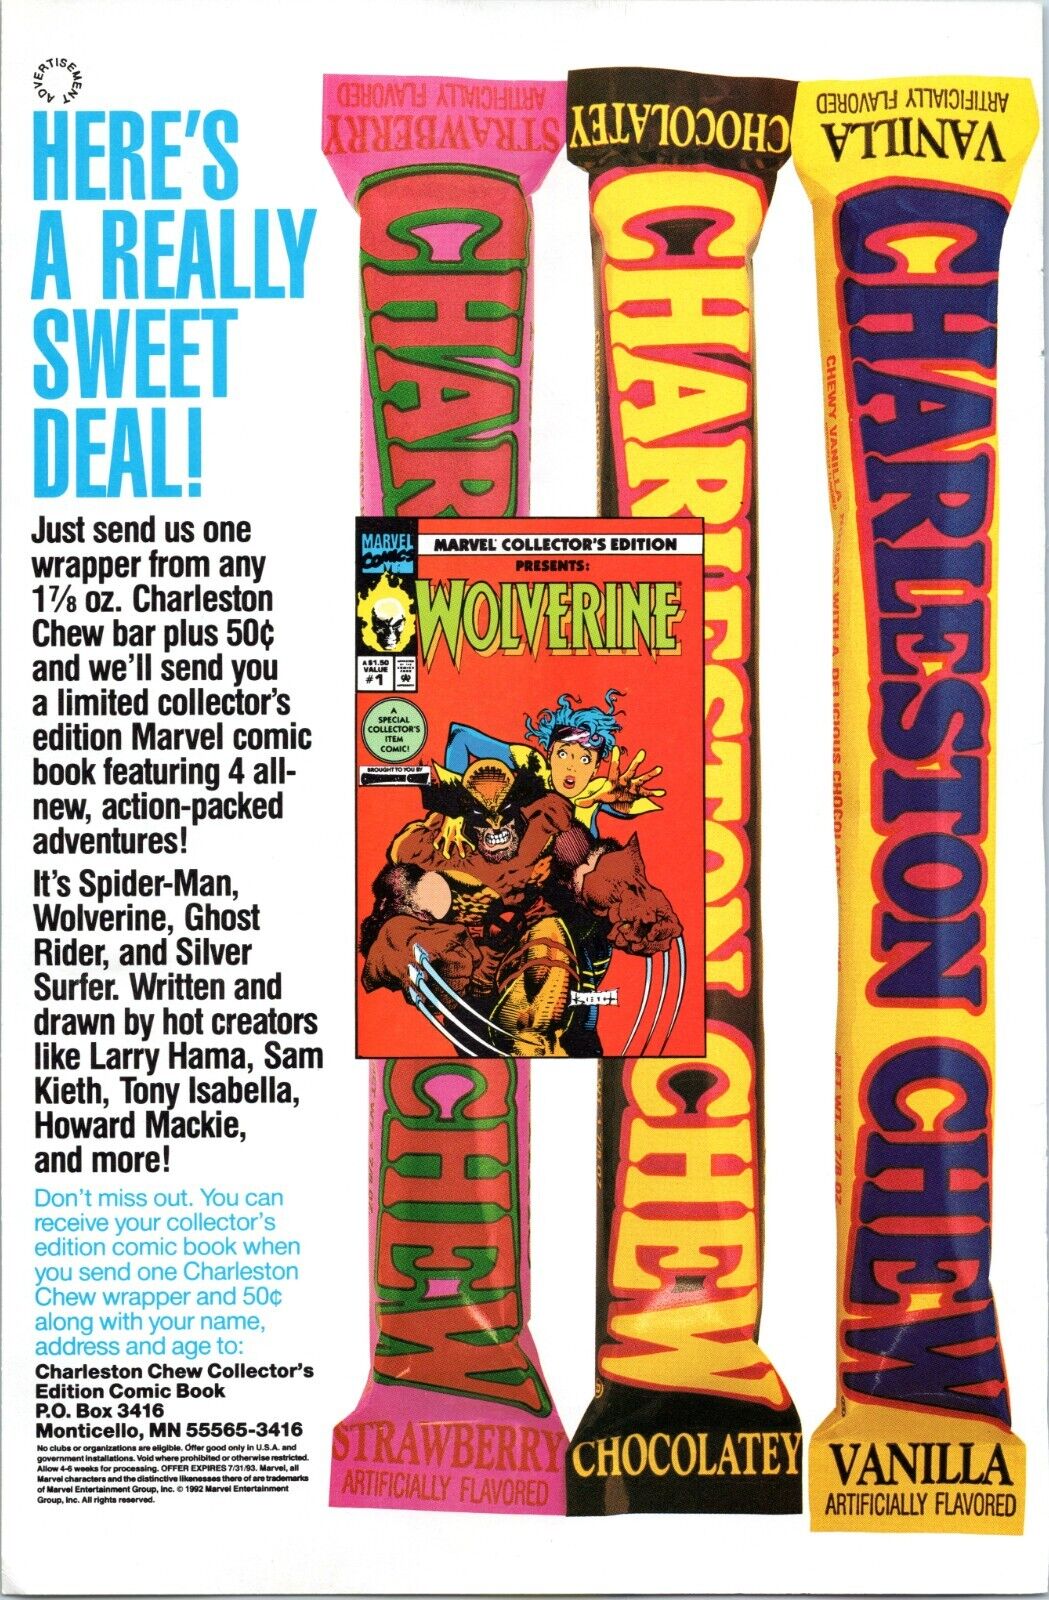 1992 Charleston Chew Candy bar print ad - Wolverine Comic offer- Comic Book size